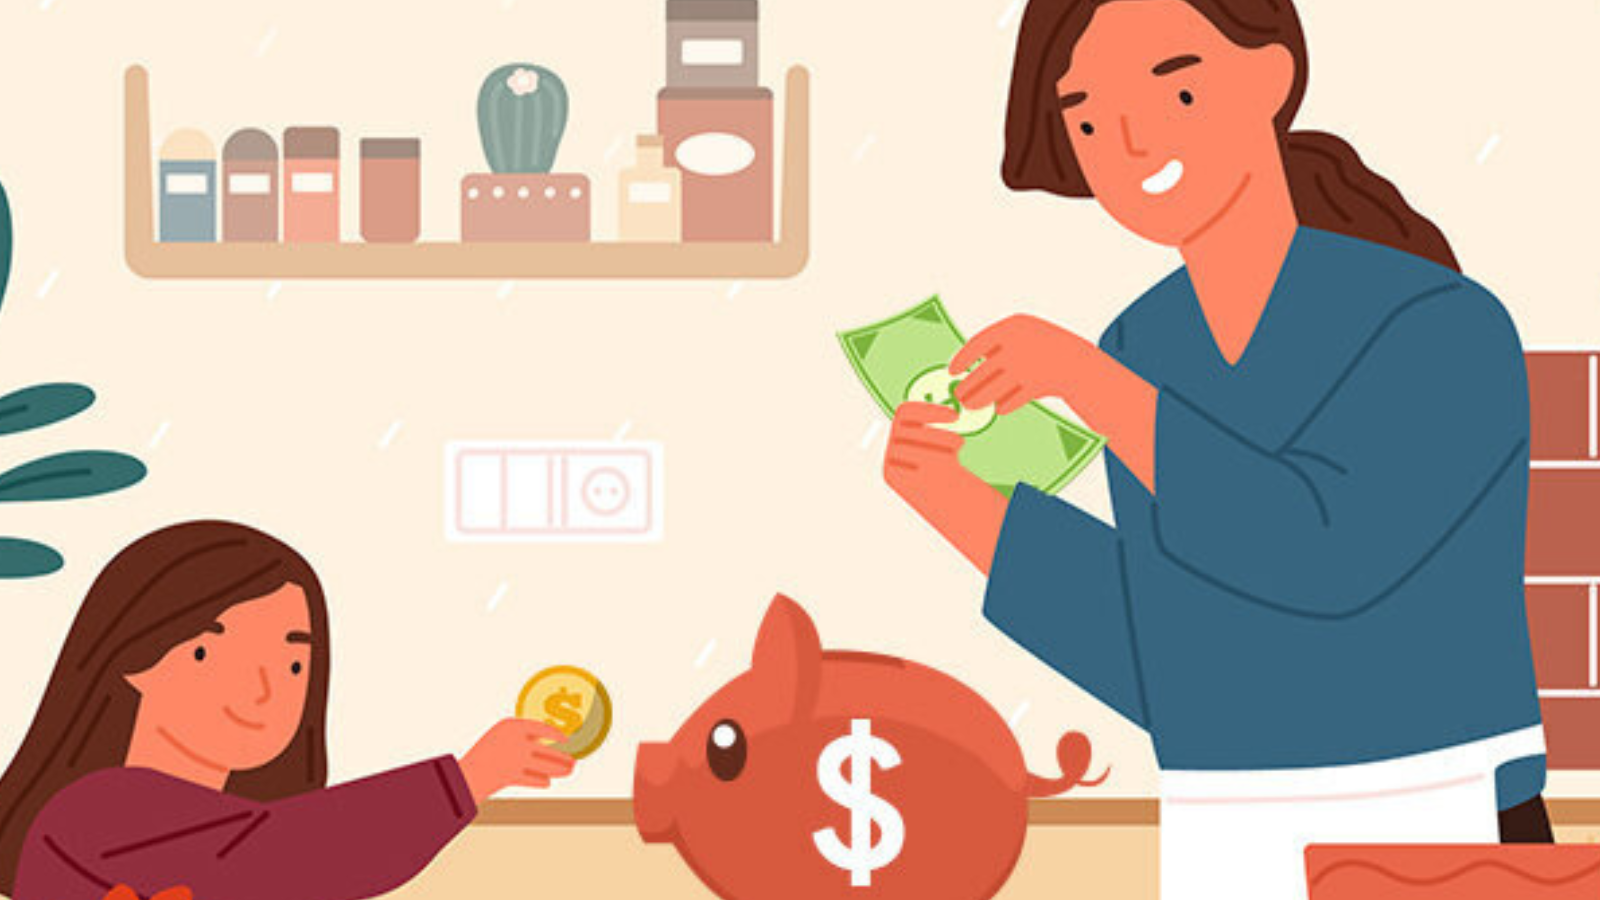 12 Money-Saving Household Habits to Practice While Sheltering in Place